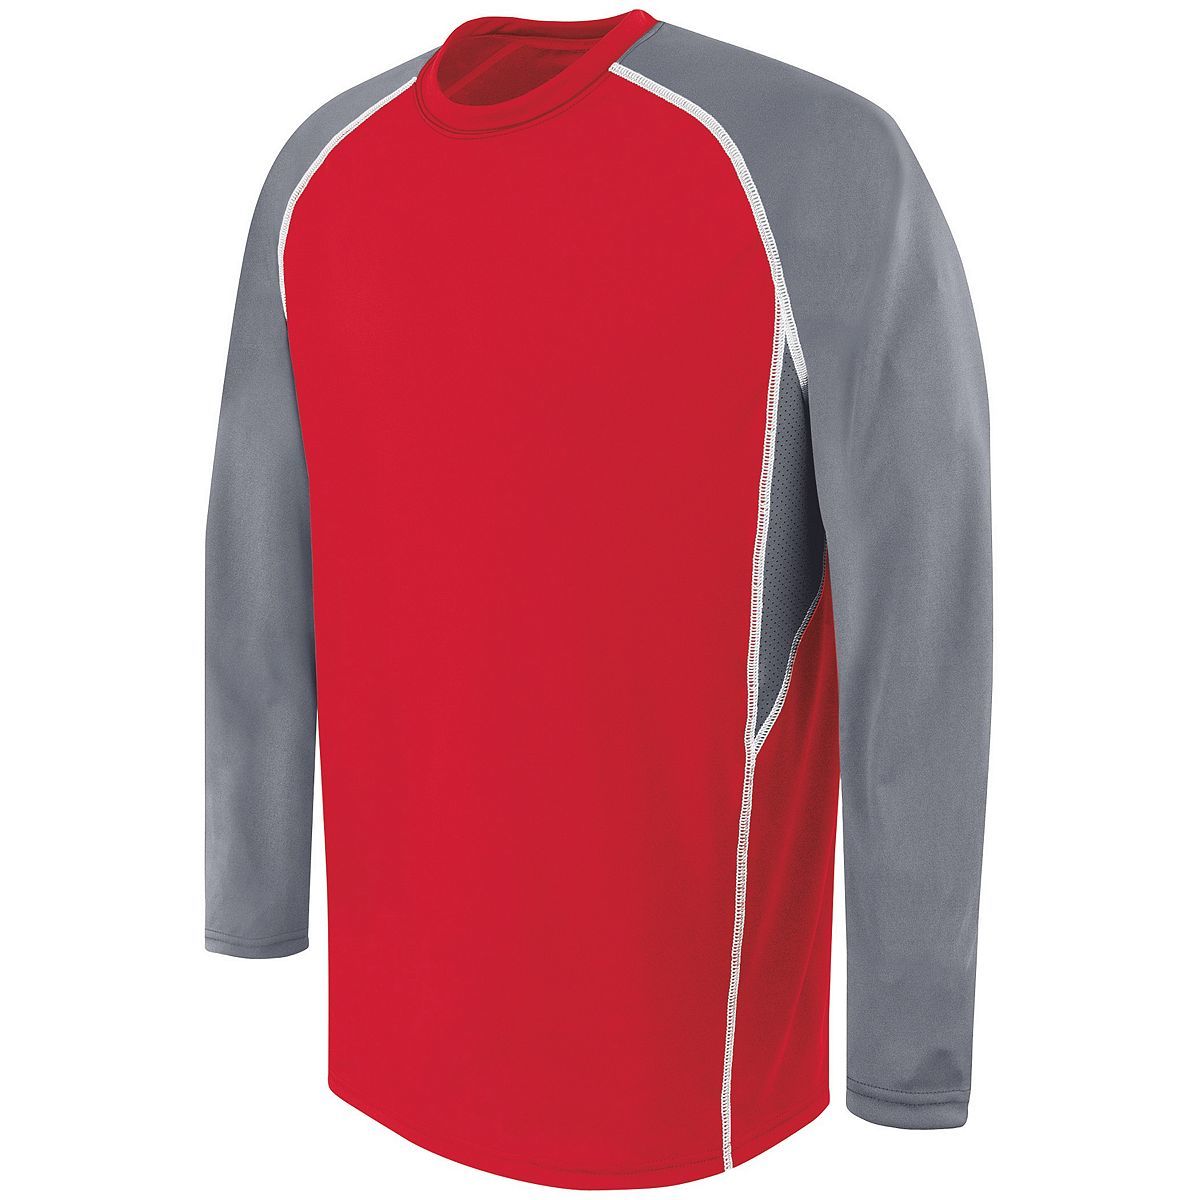 High 5 Adult Long Sleeve Evolution Top in Scarlet/Graphite/White  -Part of the Adult, High5-Products, Shirts product lines at KanaleyCreations.com